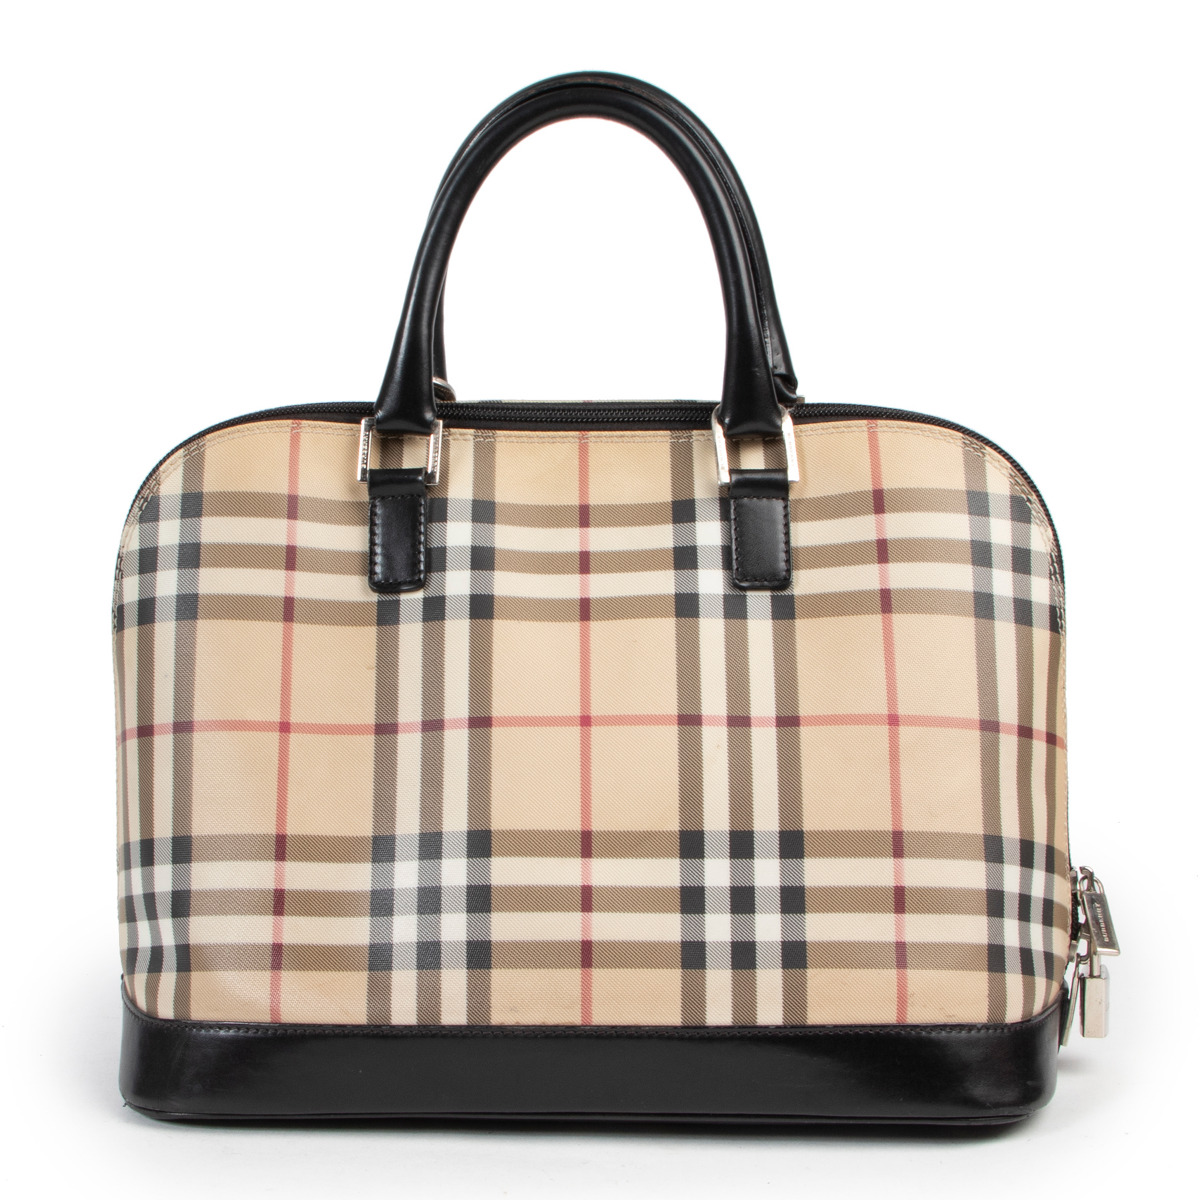 Authentic Discounts - Burberry Alma Php 17k